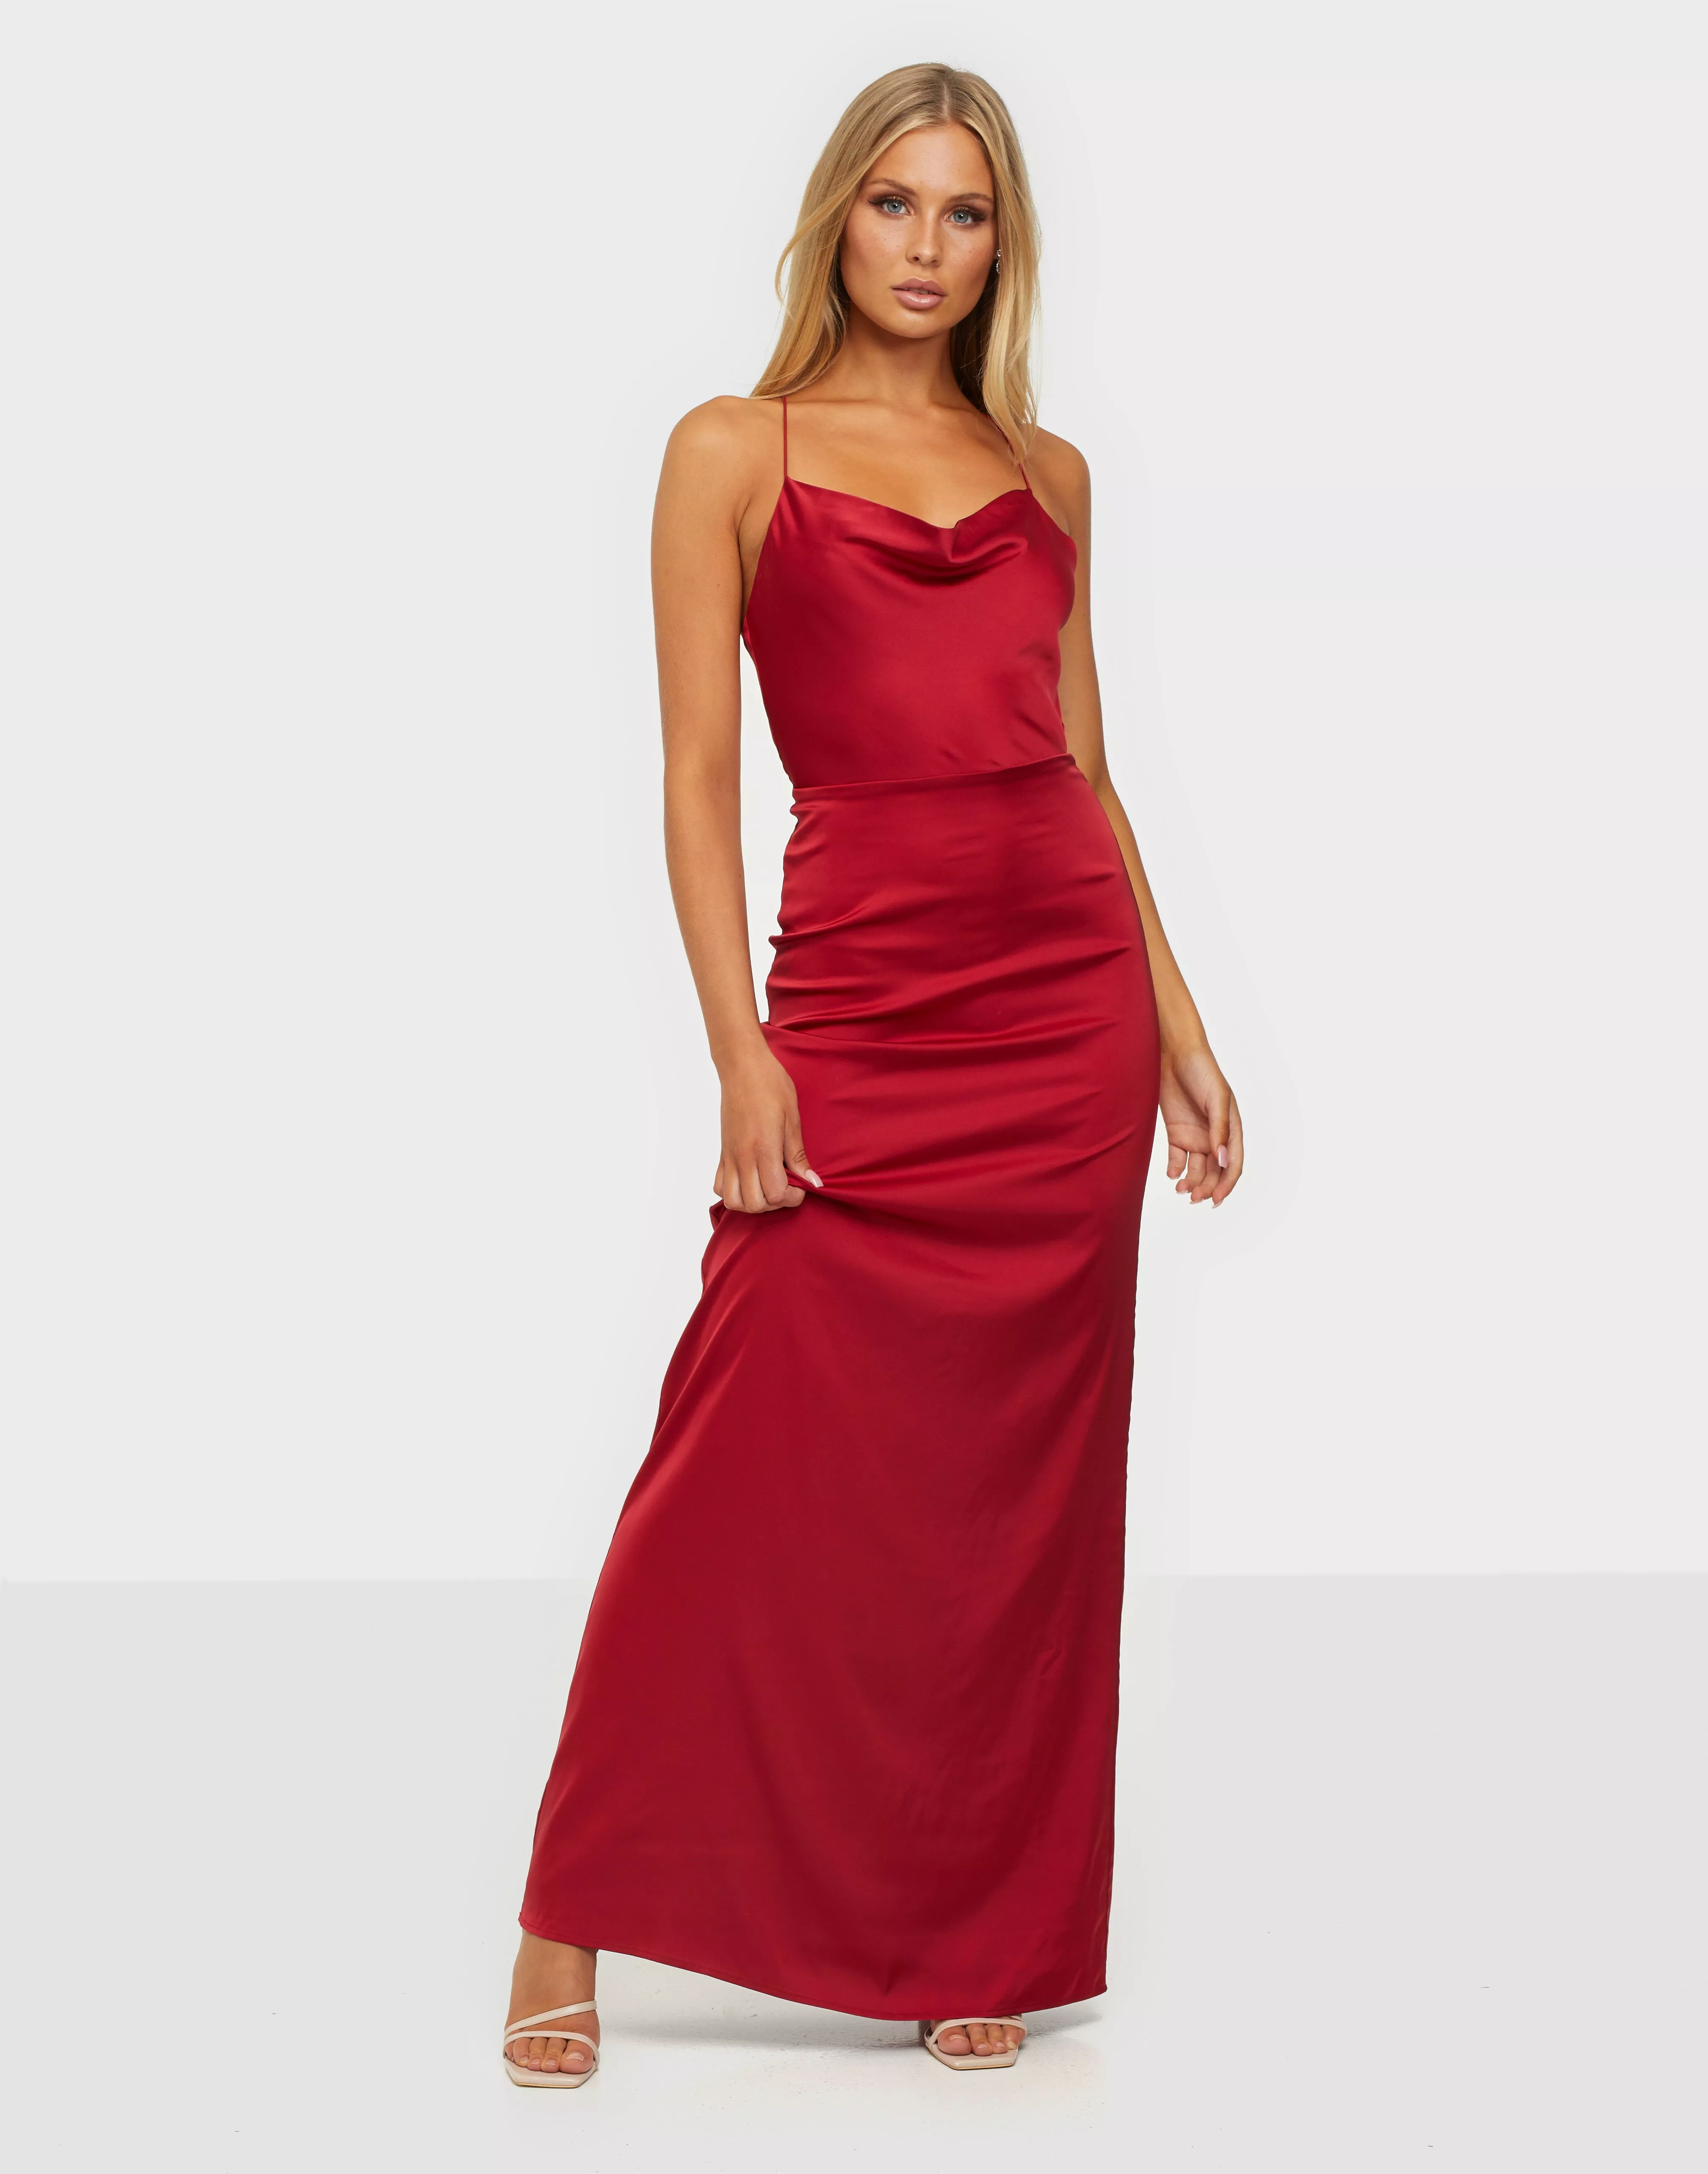 Buy Nelly Waterfall Mermaid Gown - Dark Red | Nelly.com